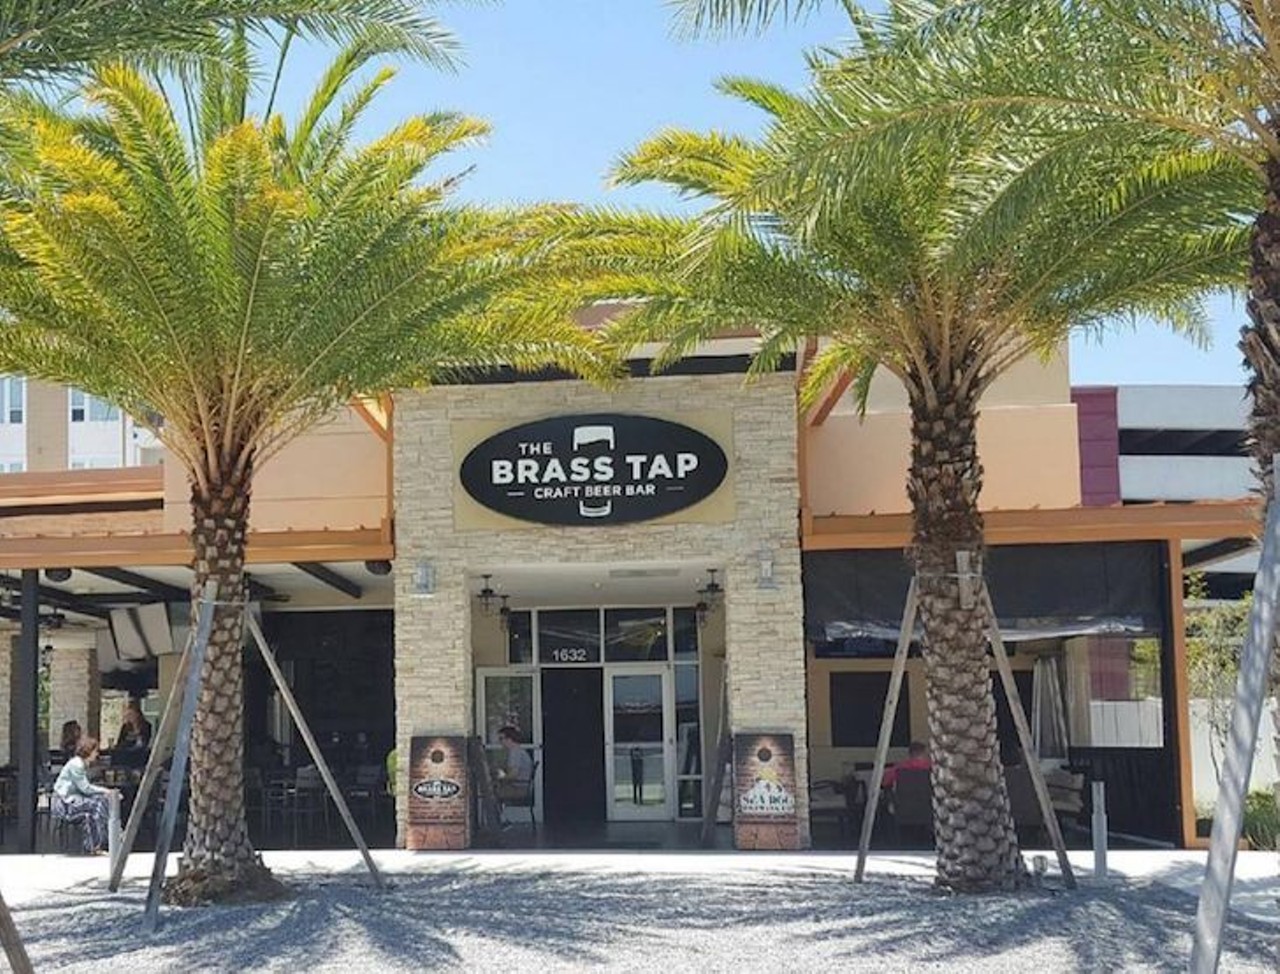 8:27 p.m. The Brass Tap
1632 N. Mills Ave., Sat: 12 p.m. - 1 a.m. Sun: 12 p.m. - 11 p.m. 
What to order: North Coast Old Rasputin Nitro
Take yourself north toward the Brass Tap where the kegs are always freshly tapped and where you're sure to help erase a majority of the failure that was projected for your short life by lady Dinah, the fortune teller, on your way to this bar.
Photo via the_brass_tap_mills_park/Instagram